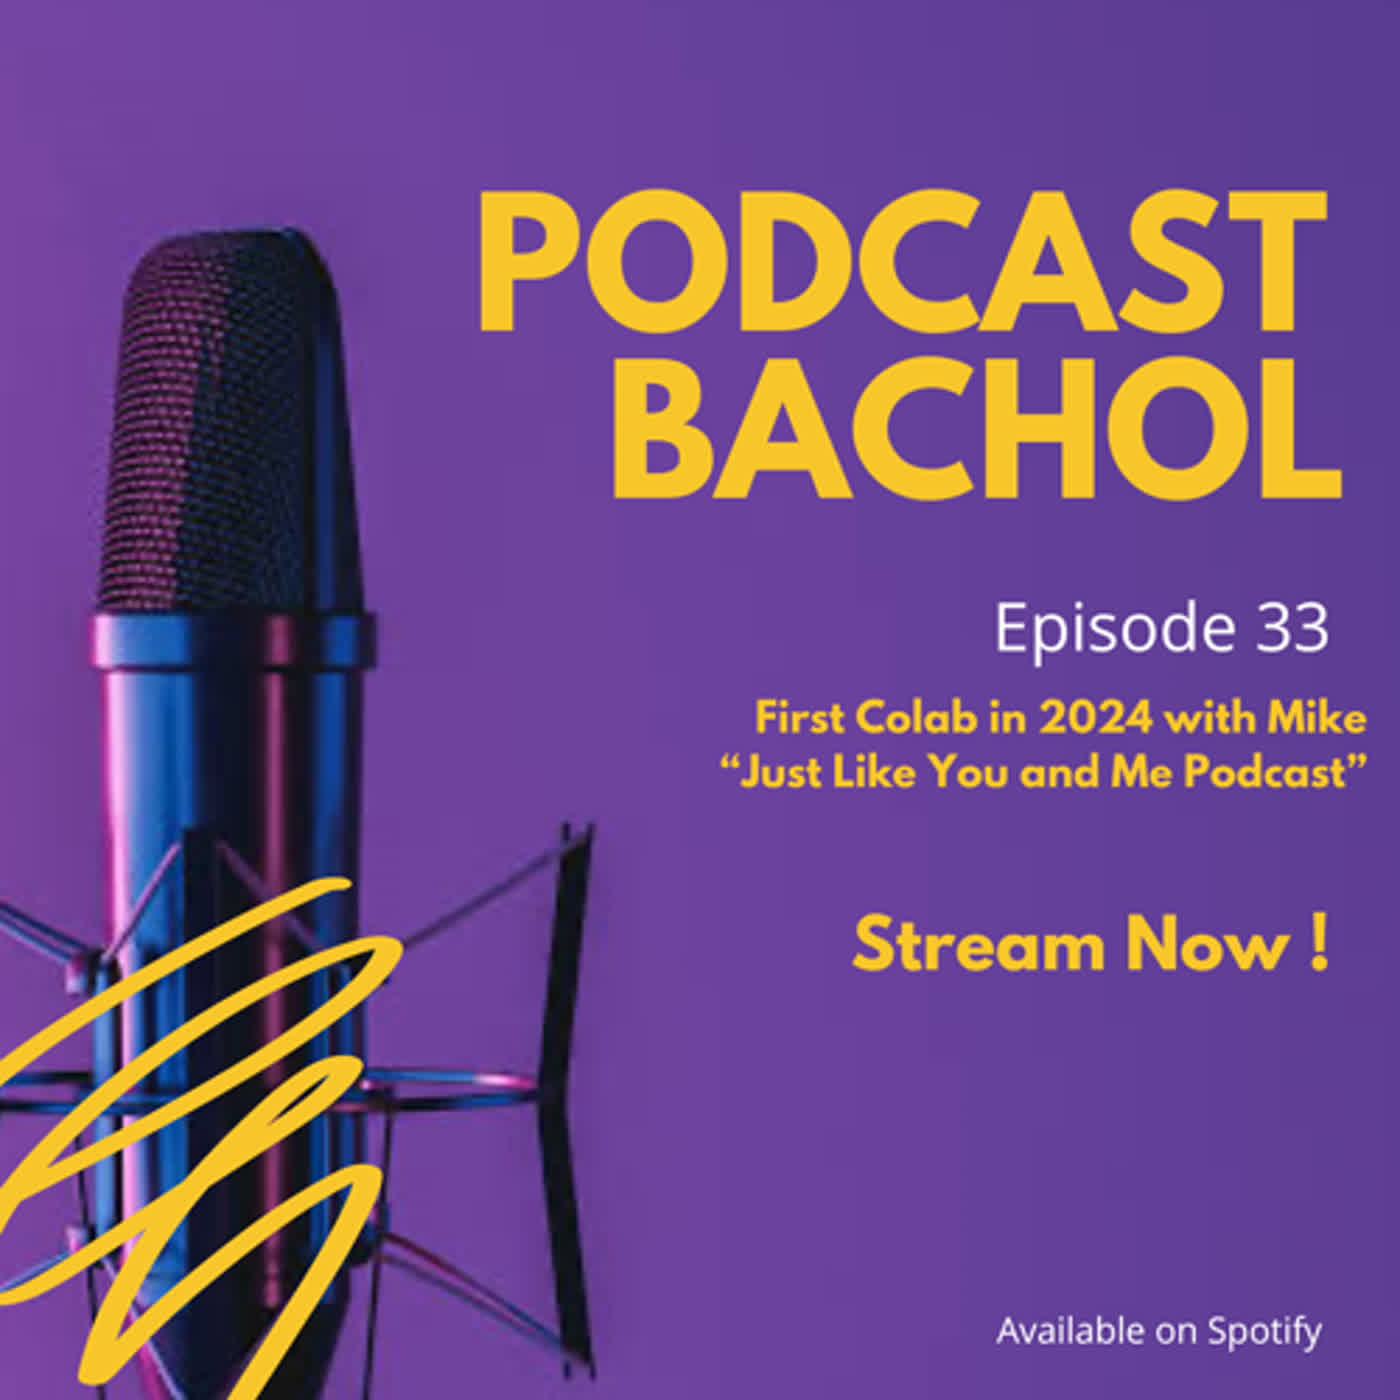 Podcast Bachol Eps 33 - First Colab in 2024 with Mike “Just Like You and Me Podcast”